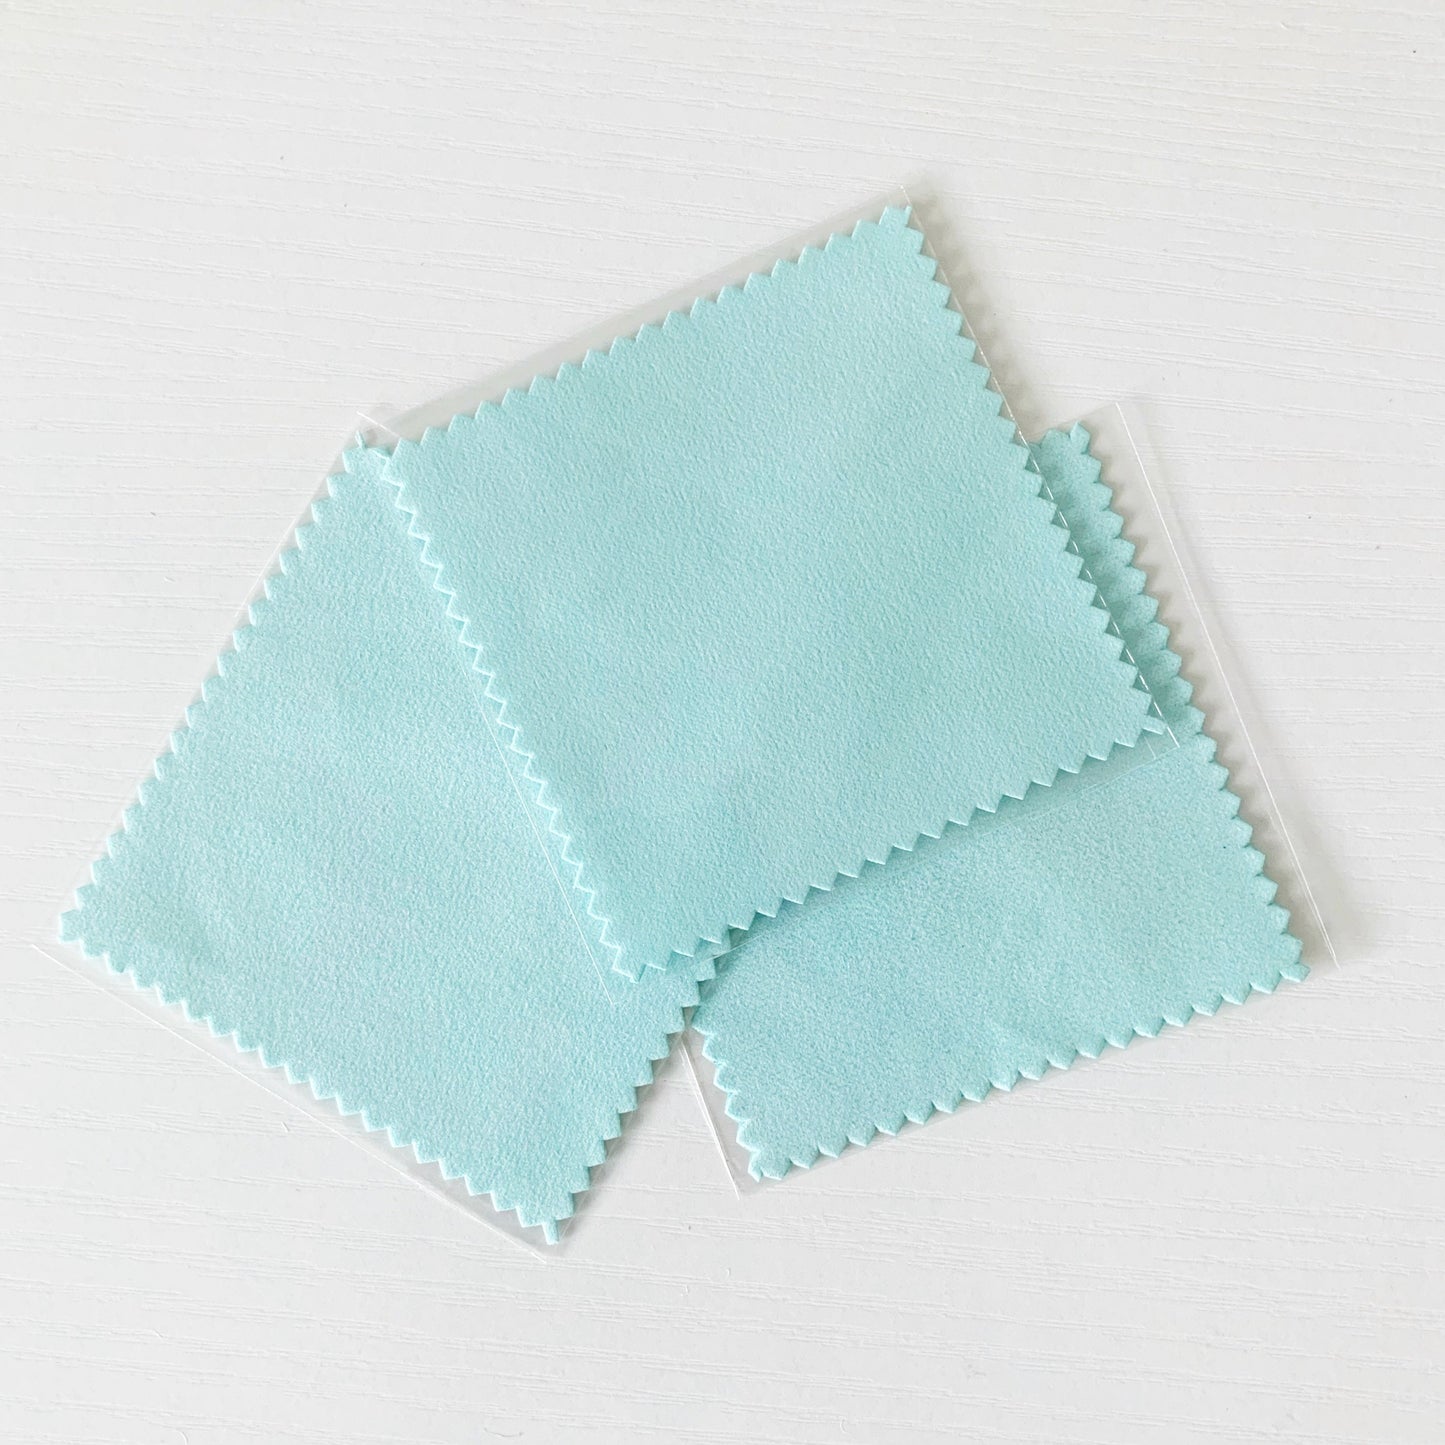 3 square light aqua color jewelry polishing cloths fanned out on a white surface